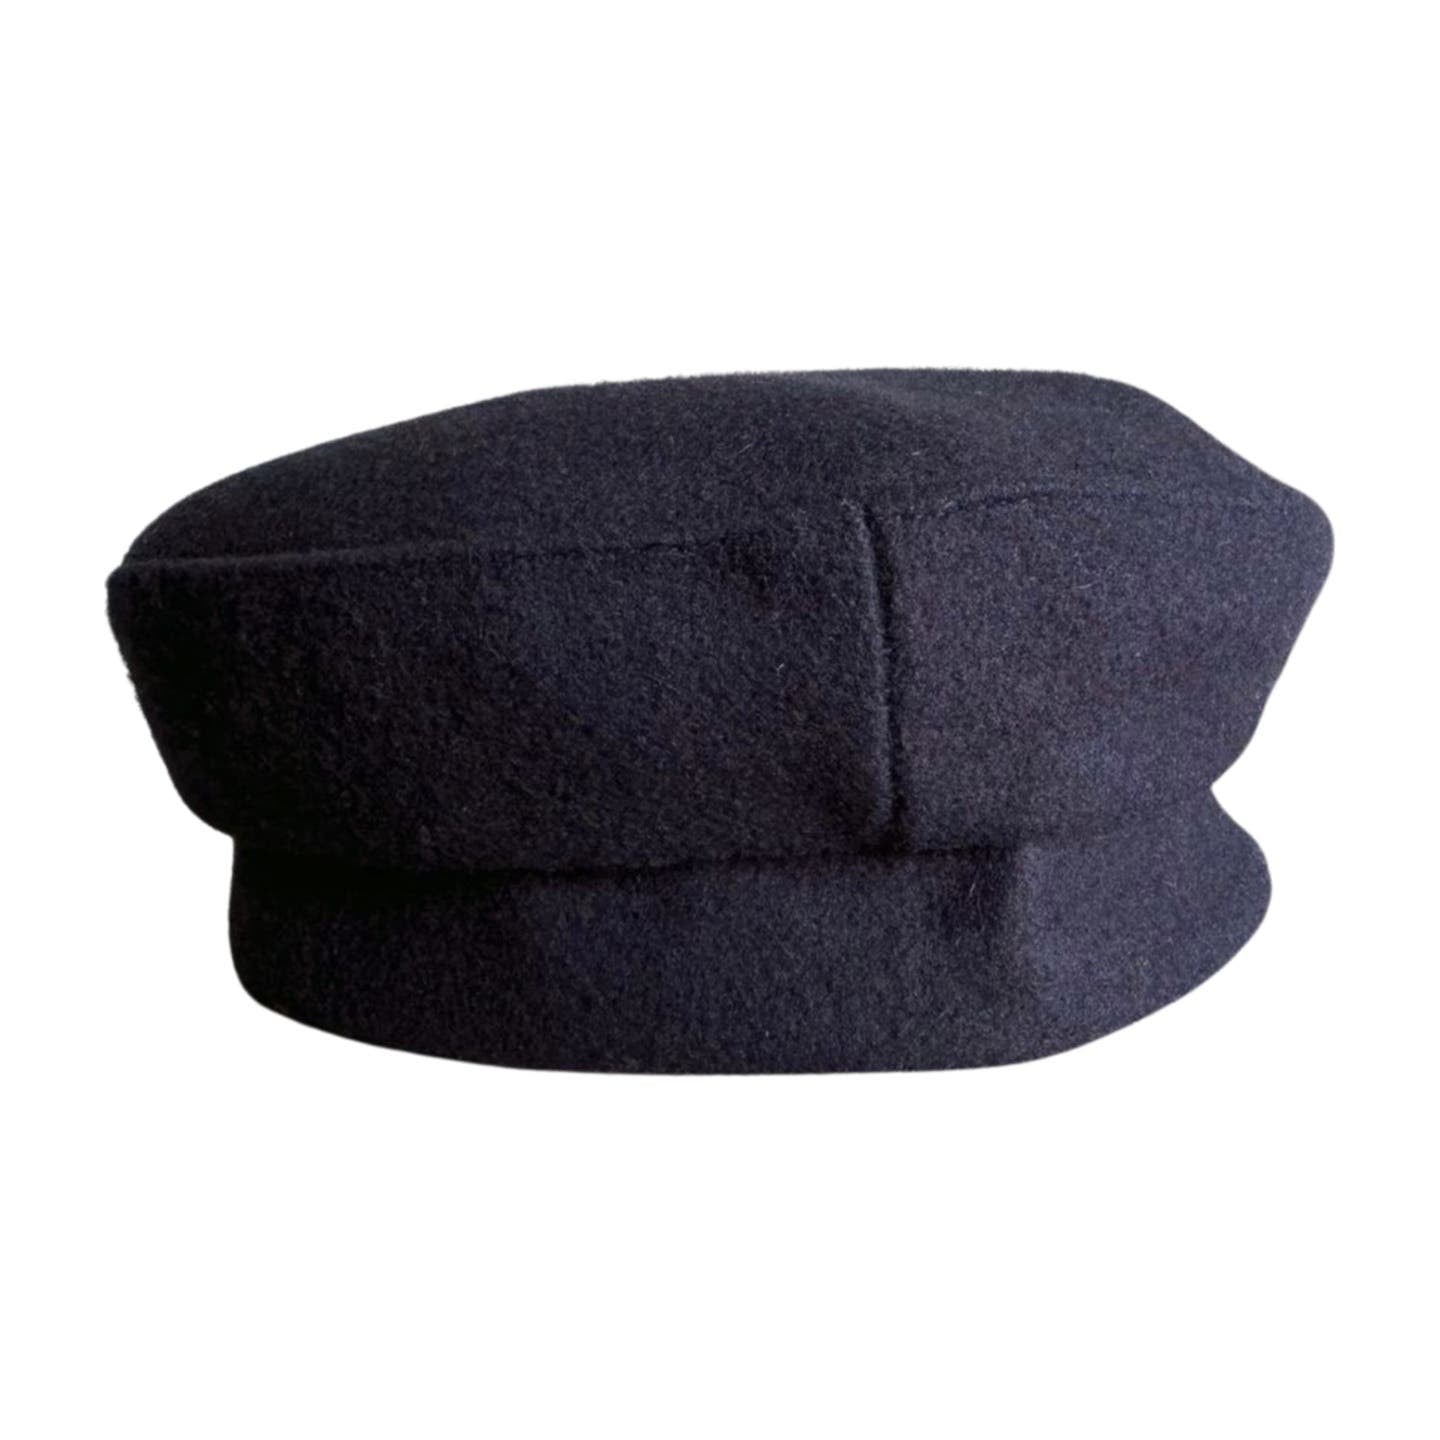 A plain, dark navy blue woolen Vintage Bloomingdale's Fishermen Hat by Bloomingdale's is centered against a white background. The vintage hat has a soft, rounded top and a short, folded brim, reminiscent of timeless designs you might find at Bloomingdale's.